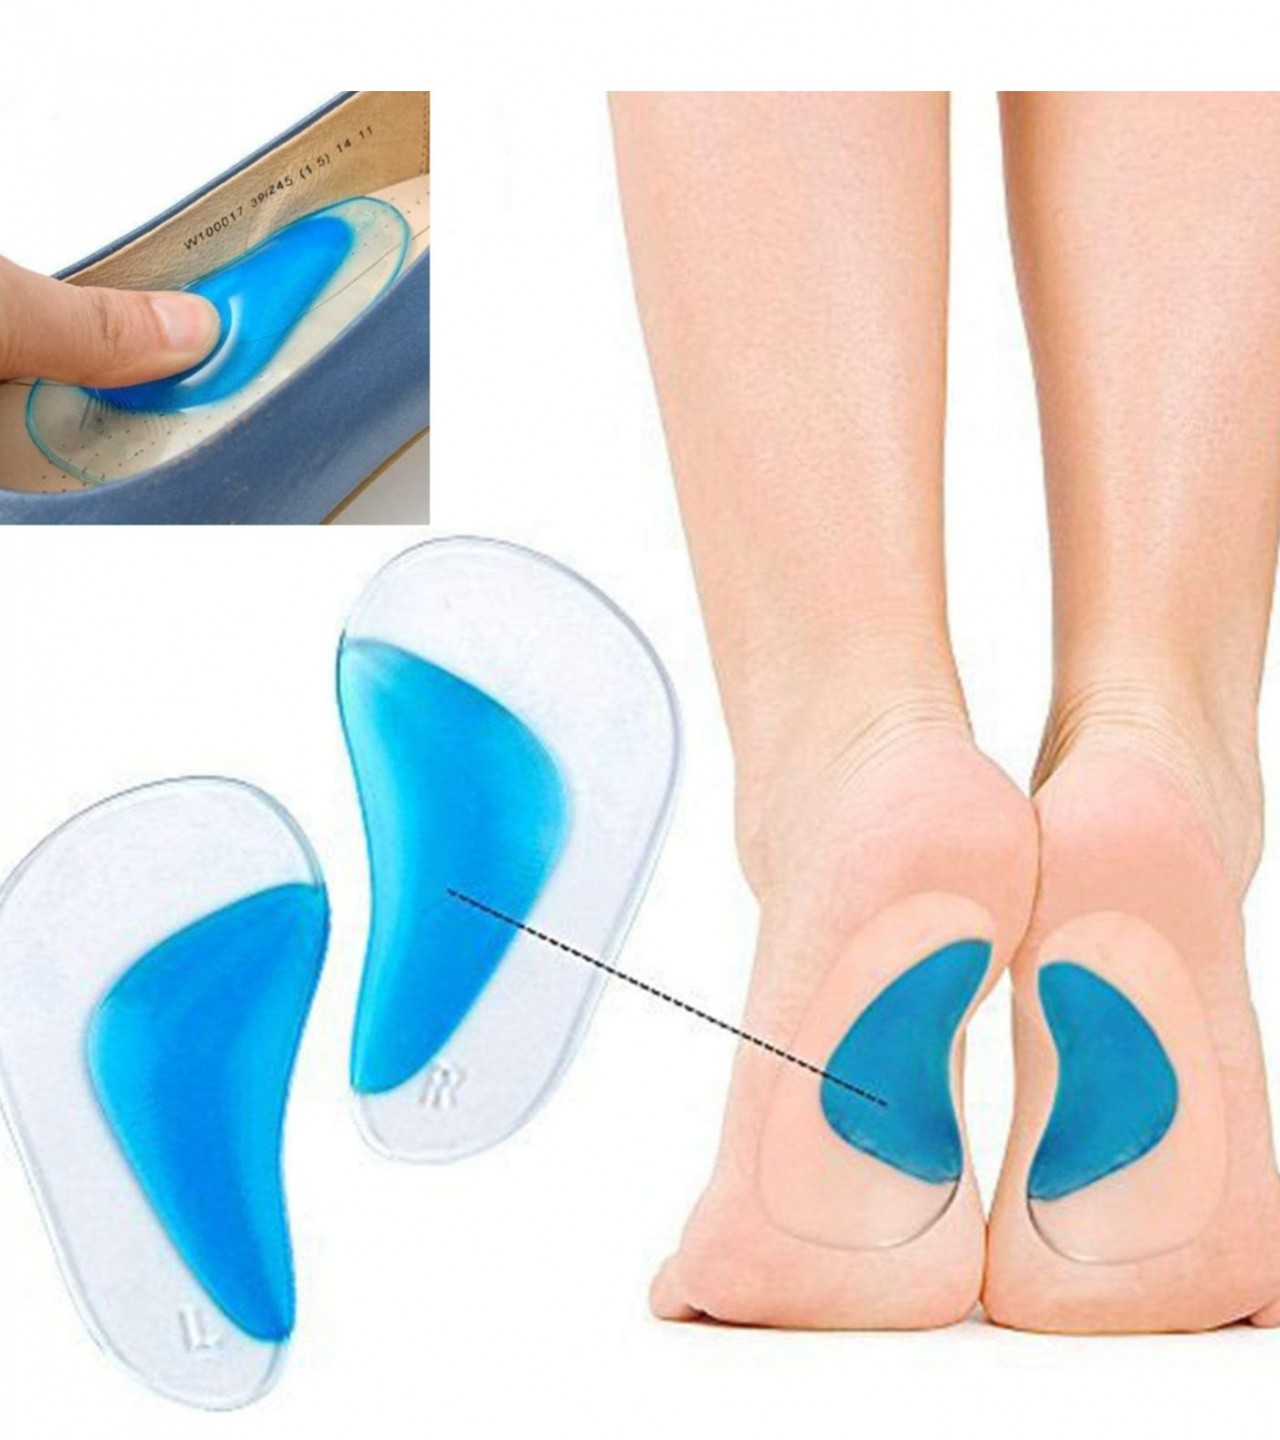 https://farosh.pk/front/images/products/nafees-gadgets-27/1pair-silicone-gel-arch-support-comfortable-insole-gel-pad-for-pain-relief-heel-813146.jpeg